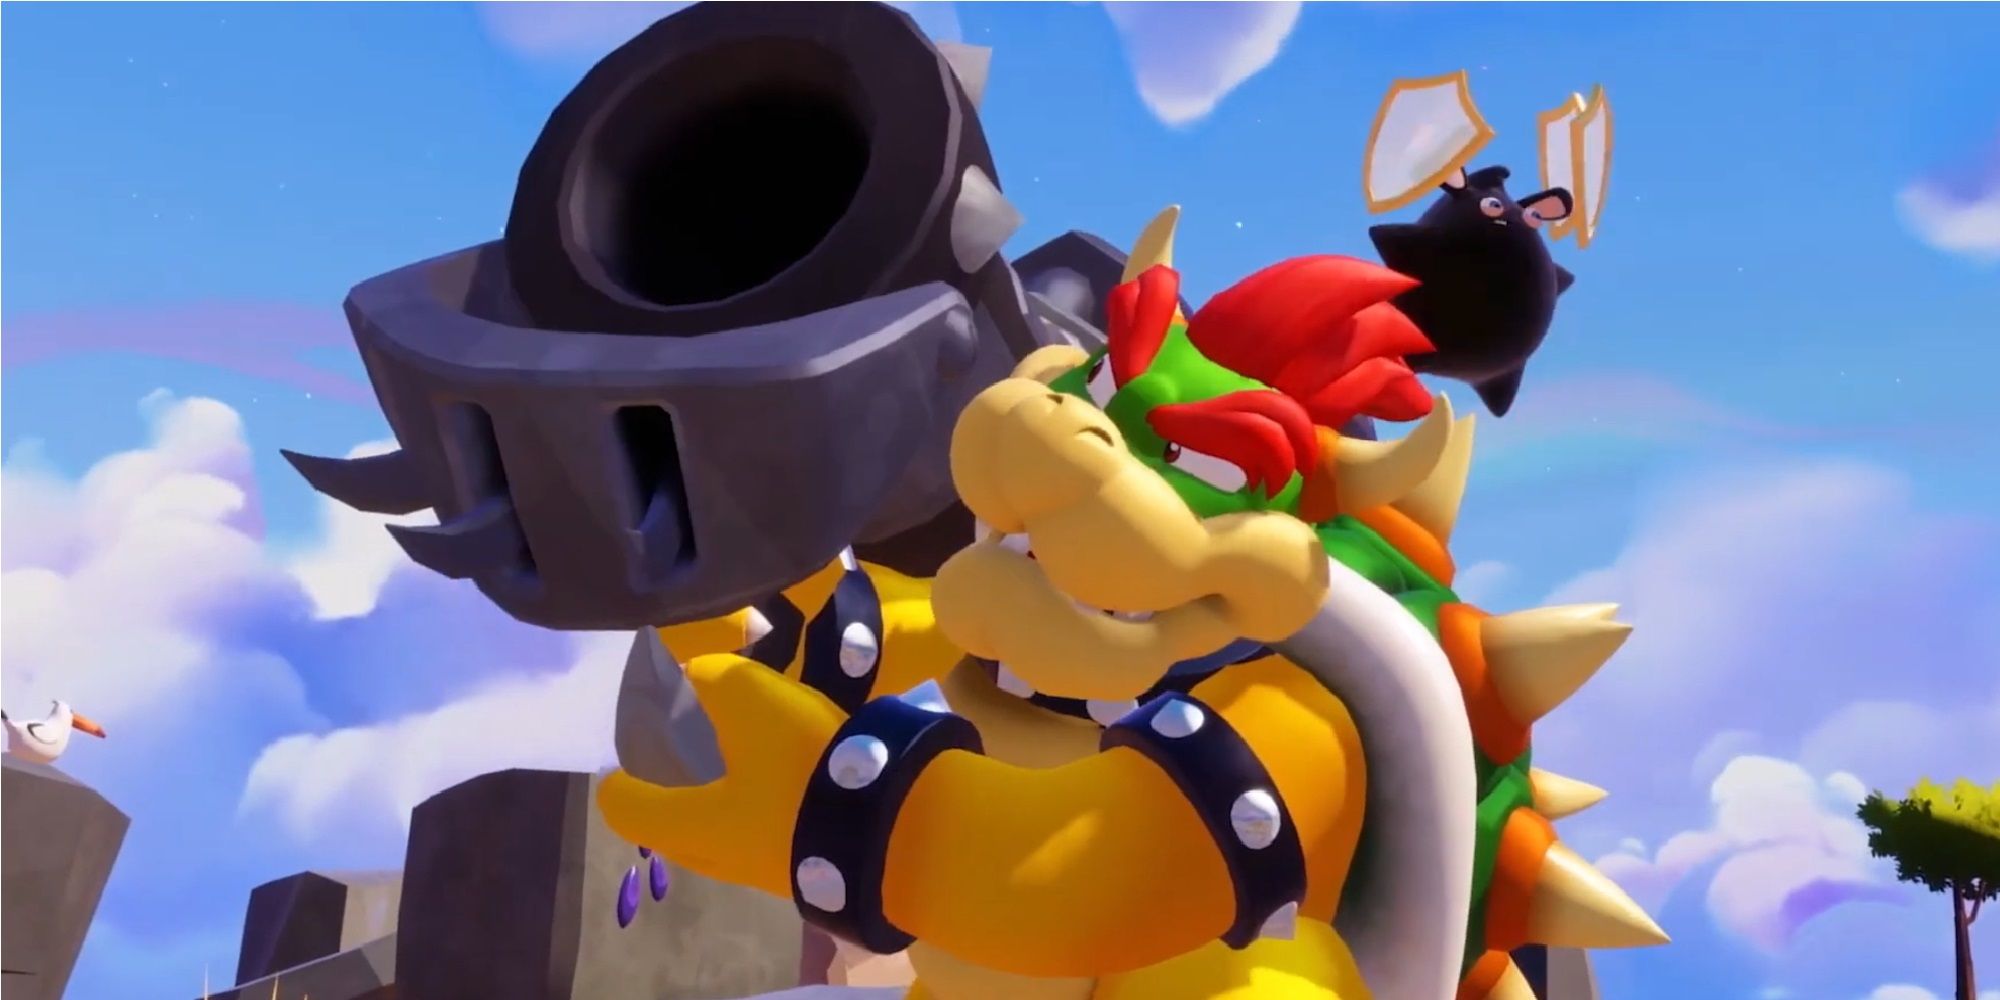 Mario + Rabbids Sparks of Hope Bowser